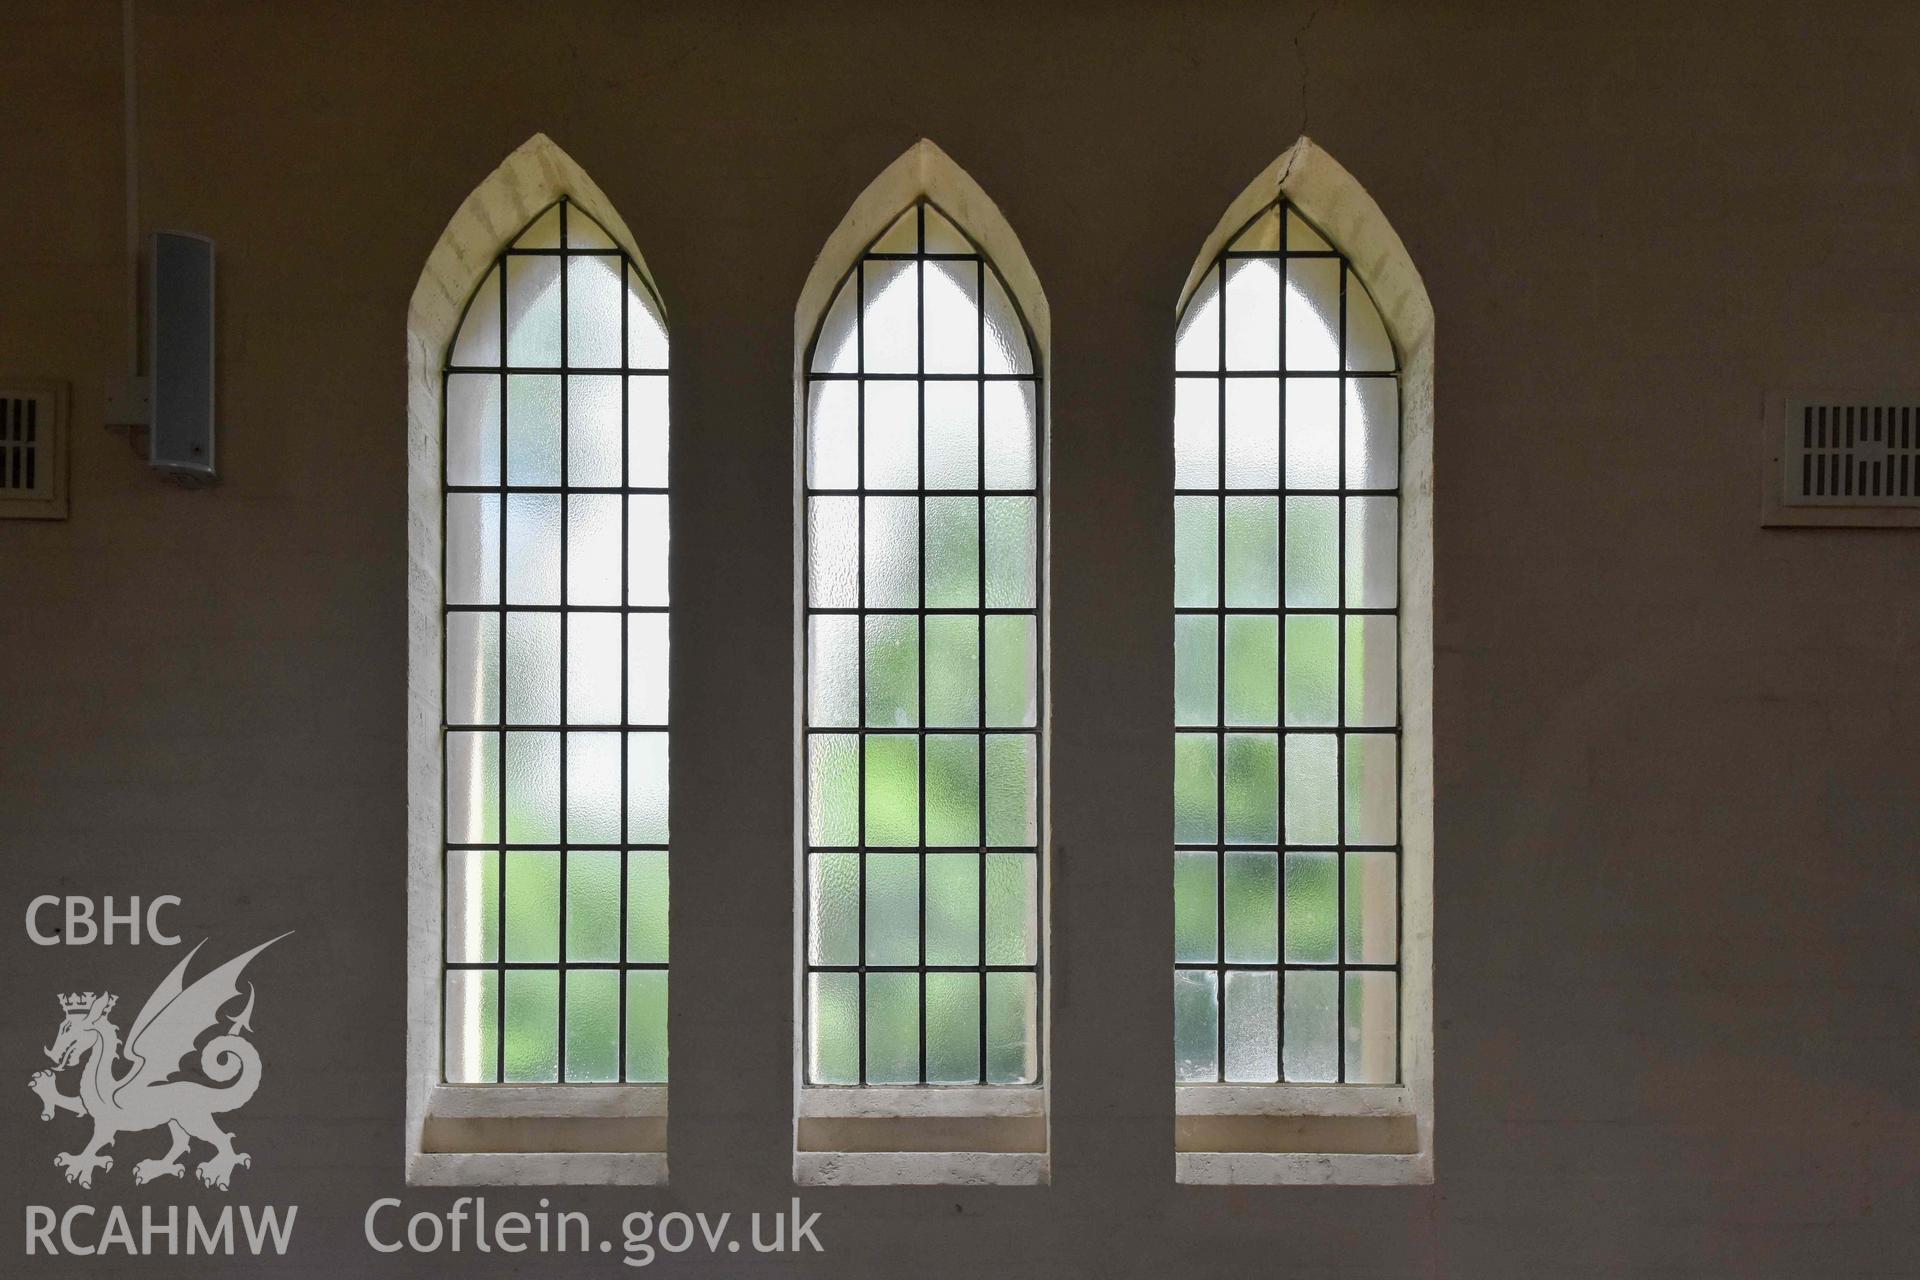 St Peter's Church, detail of nave window from interior.